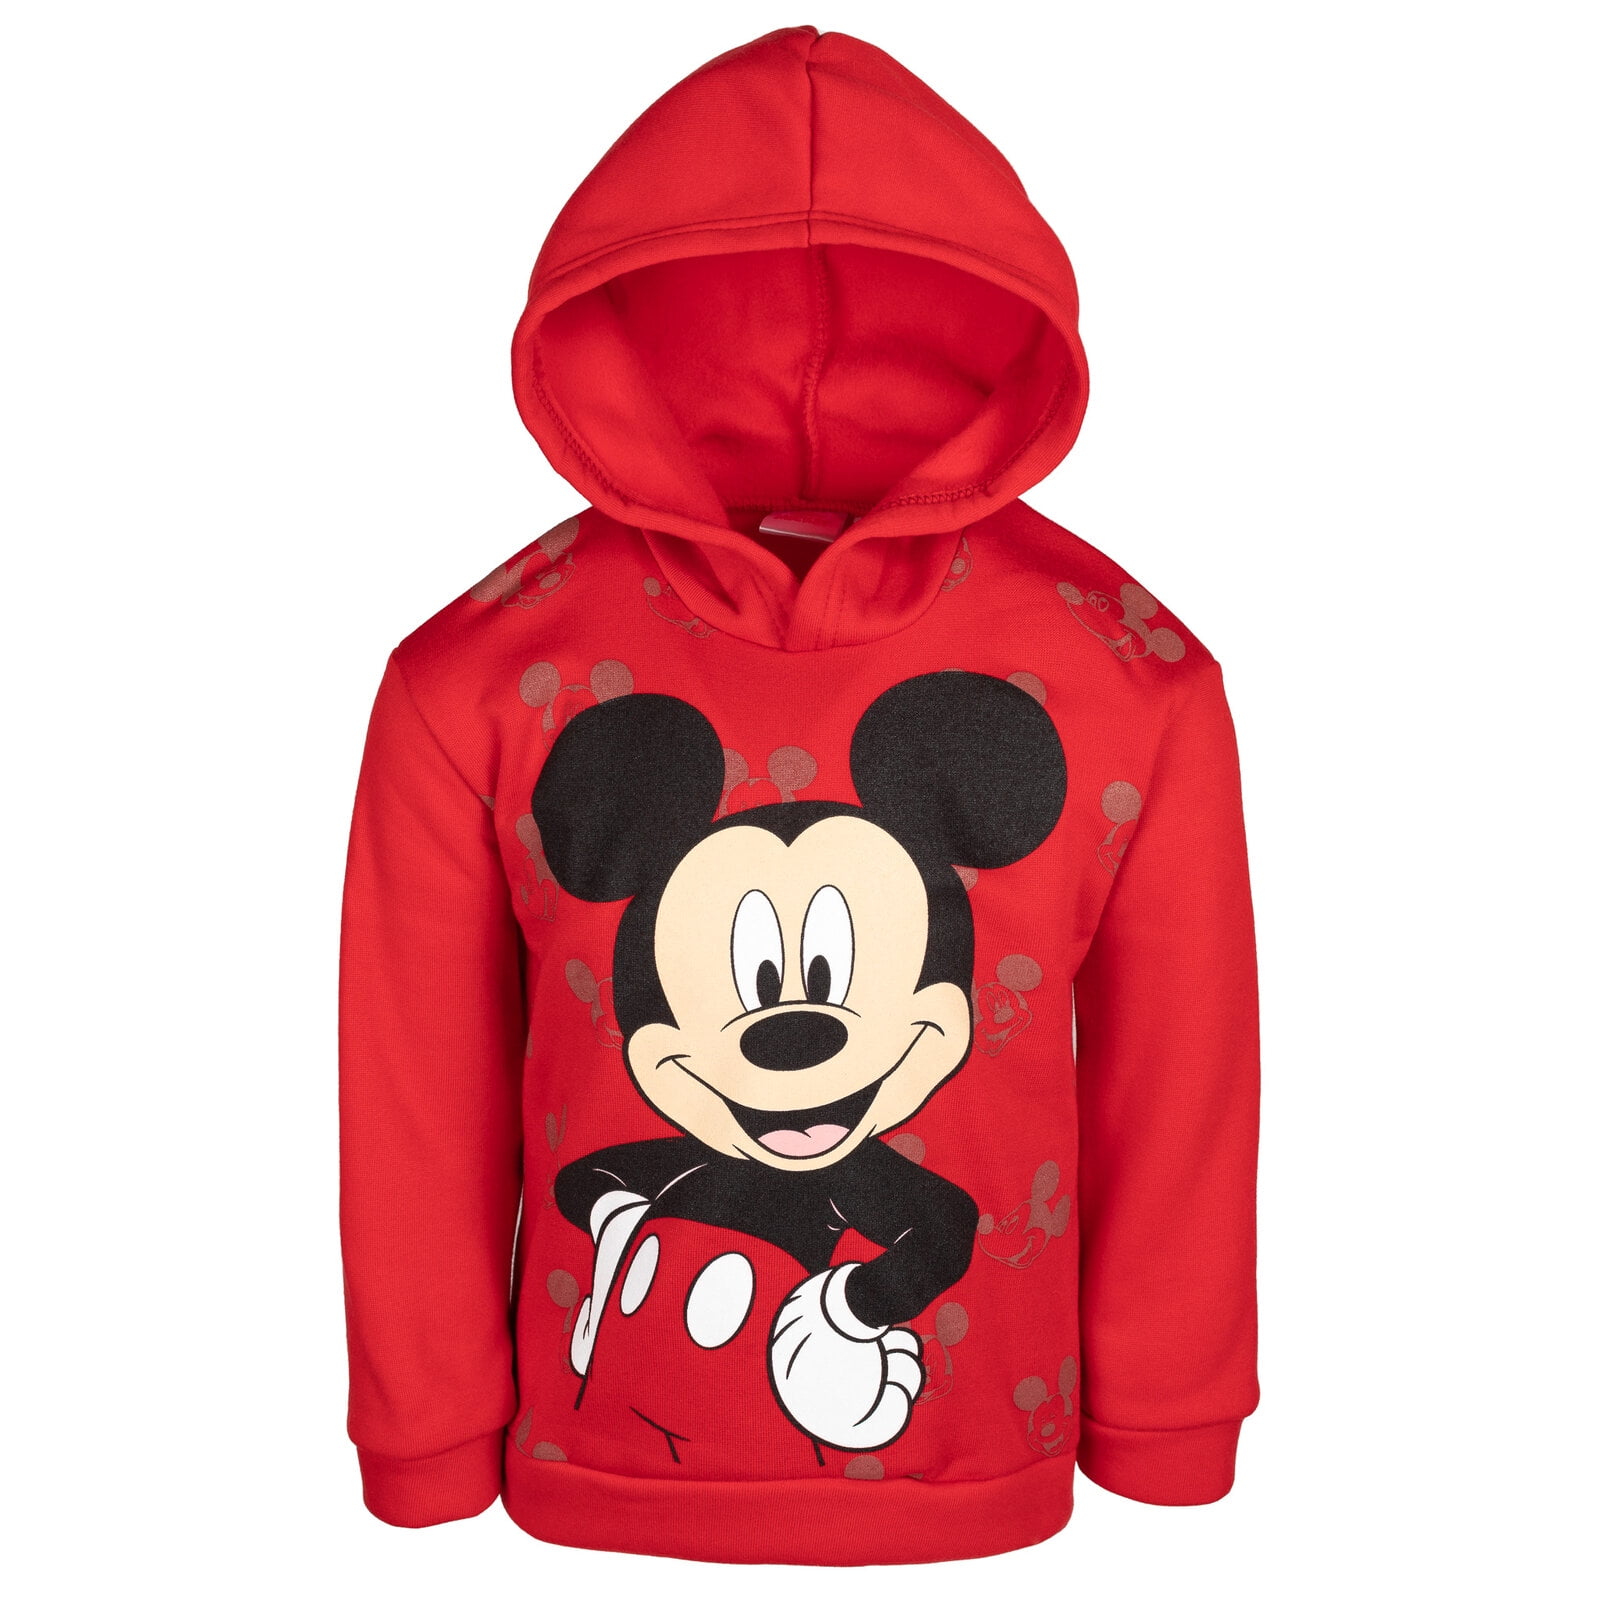 Disney Mickey Mouse Toddler Boys Pullover Hoodie Red 5T